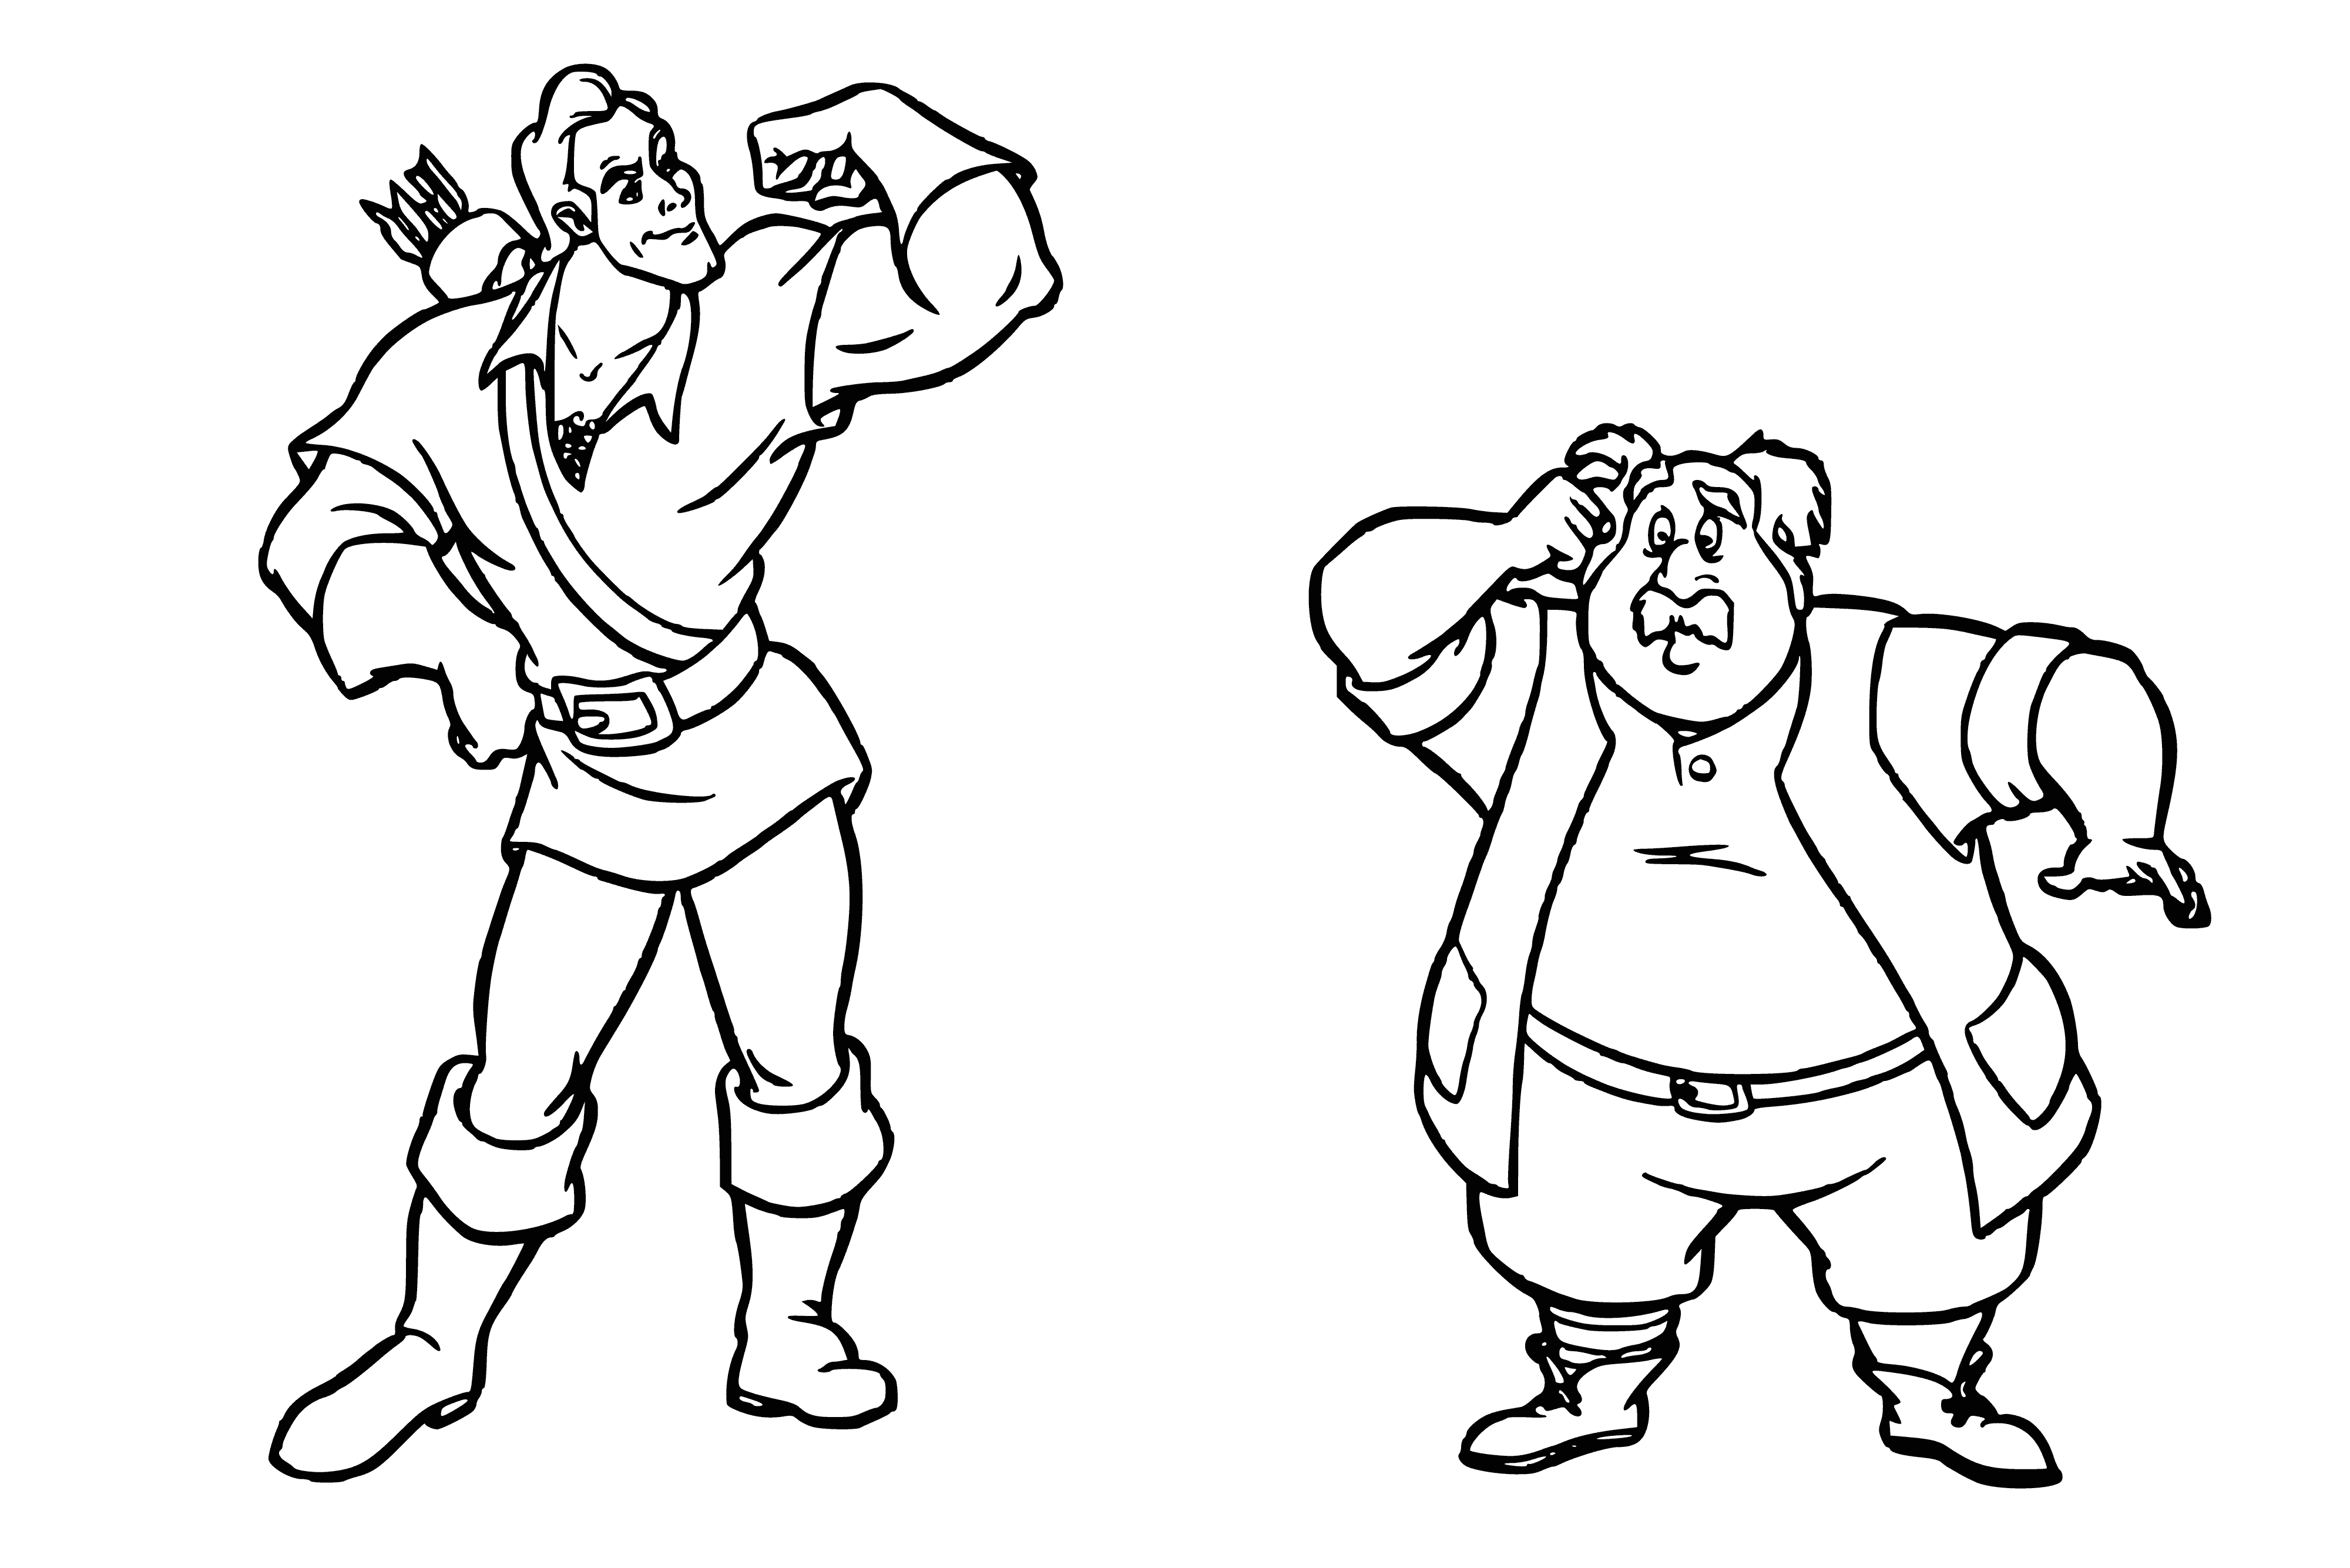 coloring page: Gaston: muscular, confident; Maurice: gray hair, worried, holding stick & scarf.